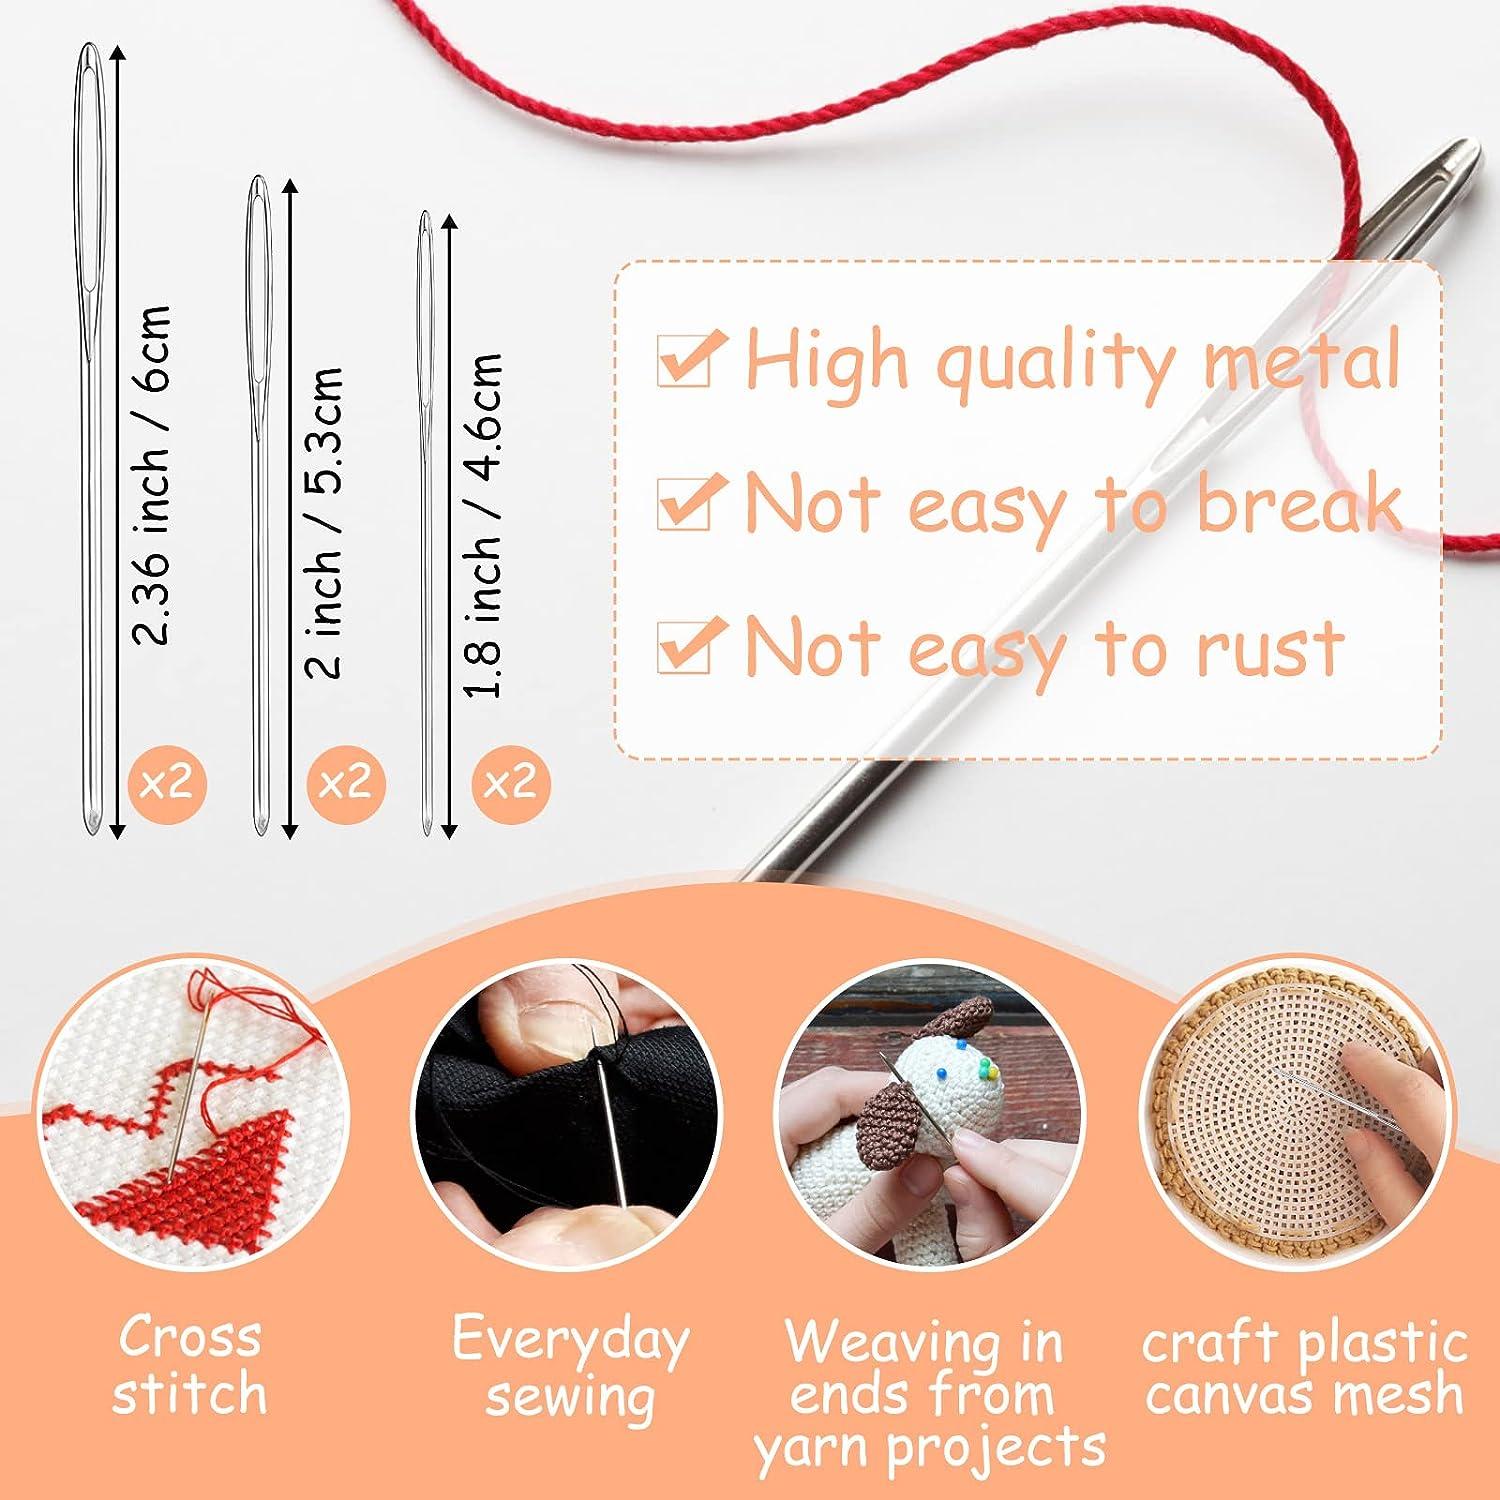 Yarn Needles Tapestry Needle for Crochet - 10 PCS Large Eye Darning Needle  for Sewing,Blunt and Curved Tapestry Needle for Knitting,Weaving Stitch  Supplies with Plastic Storage Case - 